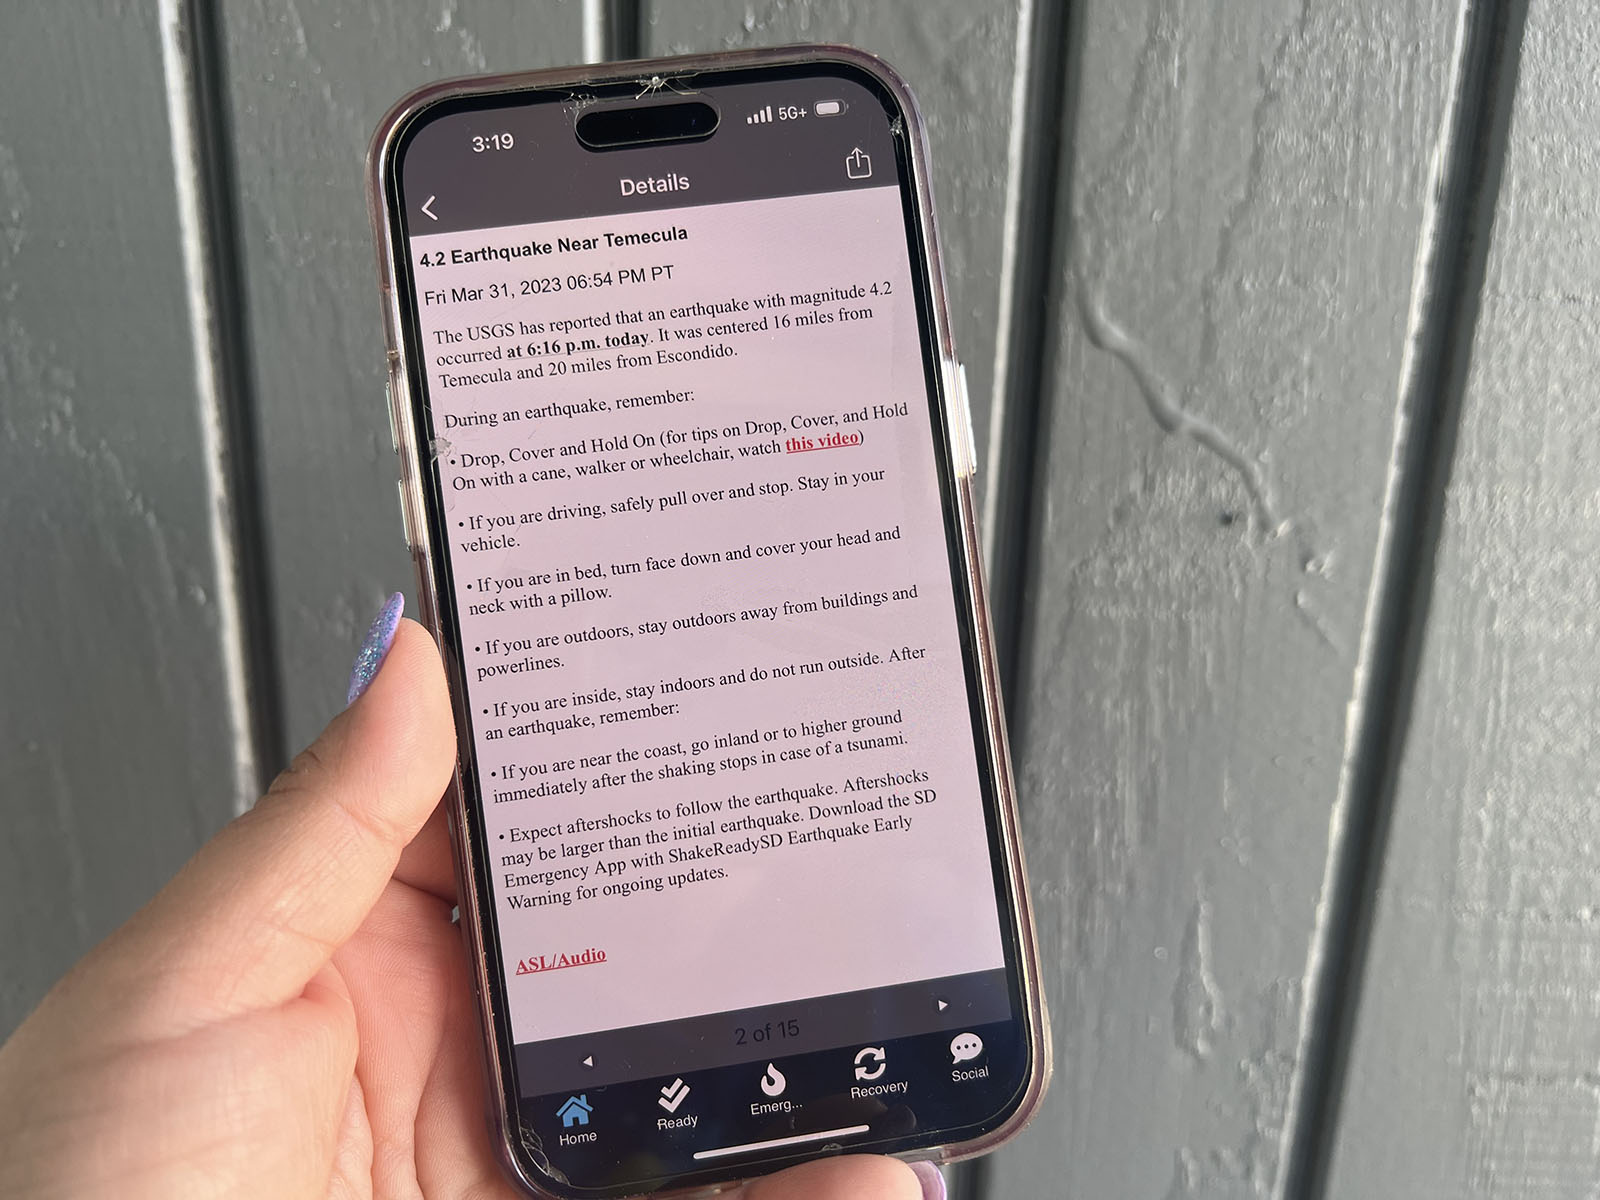 Be prepared for local disasters with the SD emergency app equipped with the ShakeAlert | earthquake early warning system  News